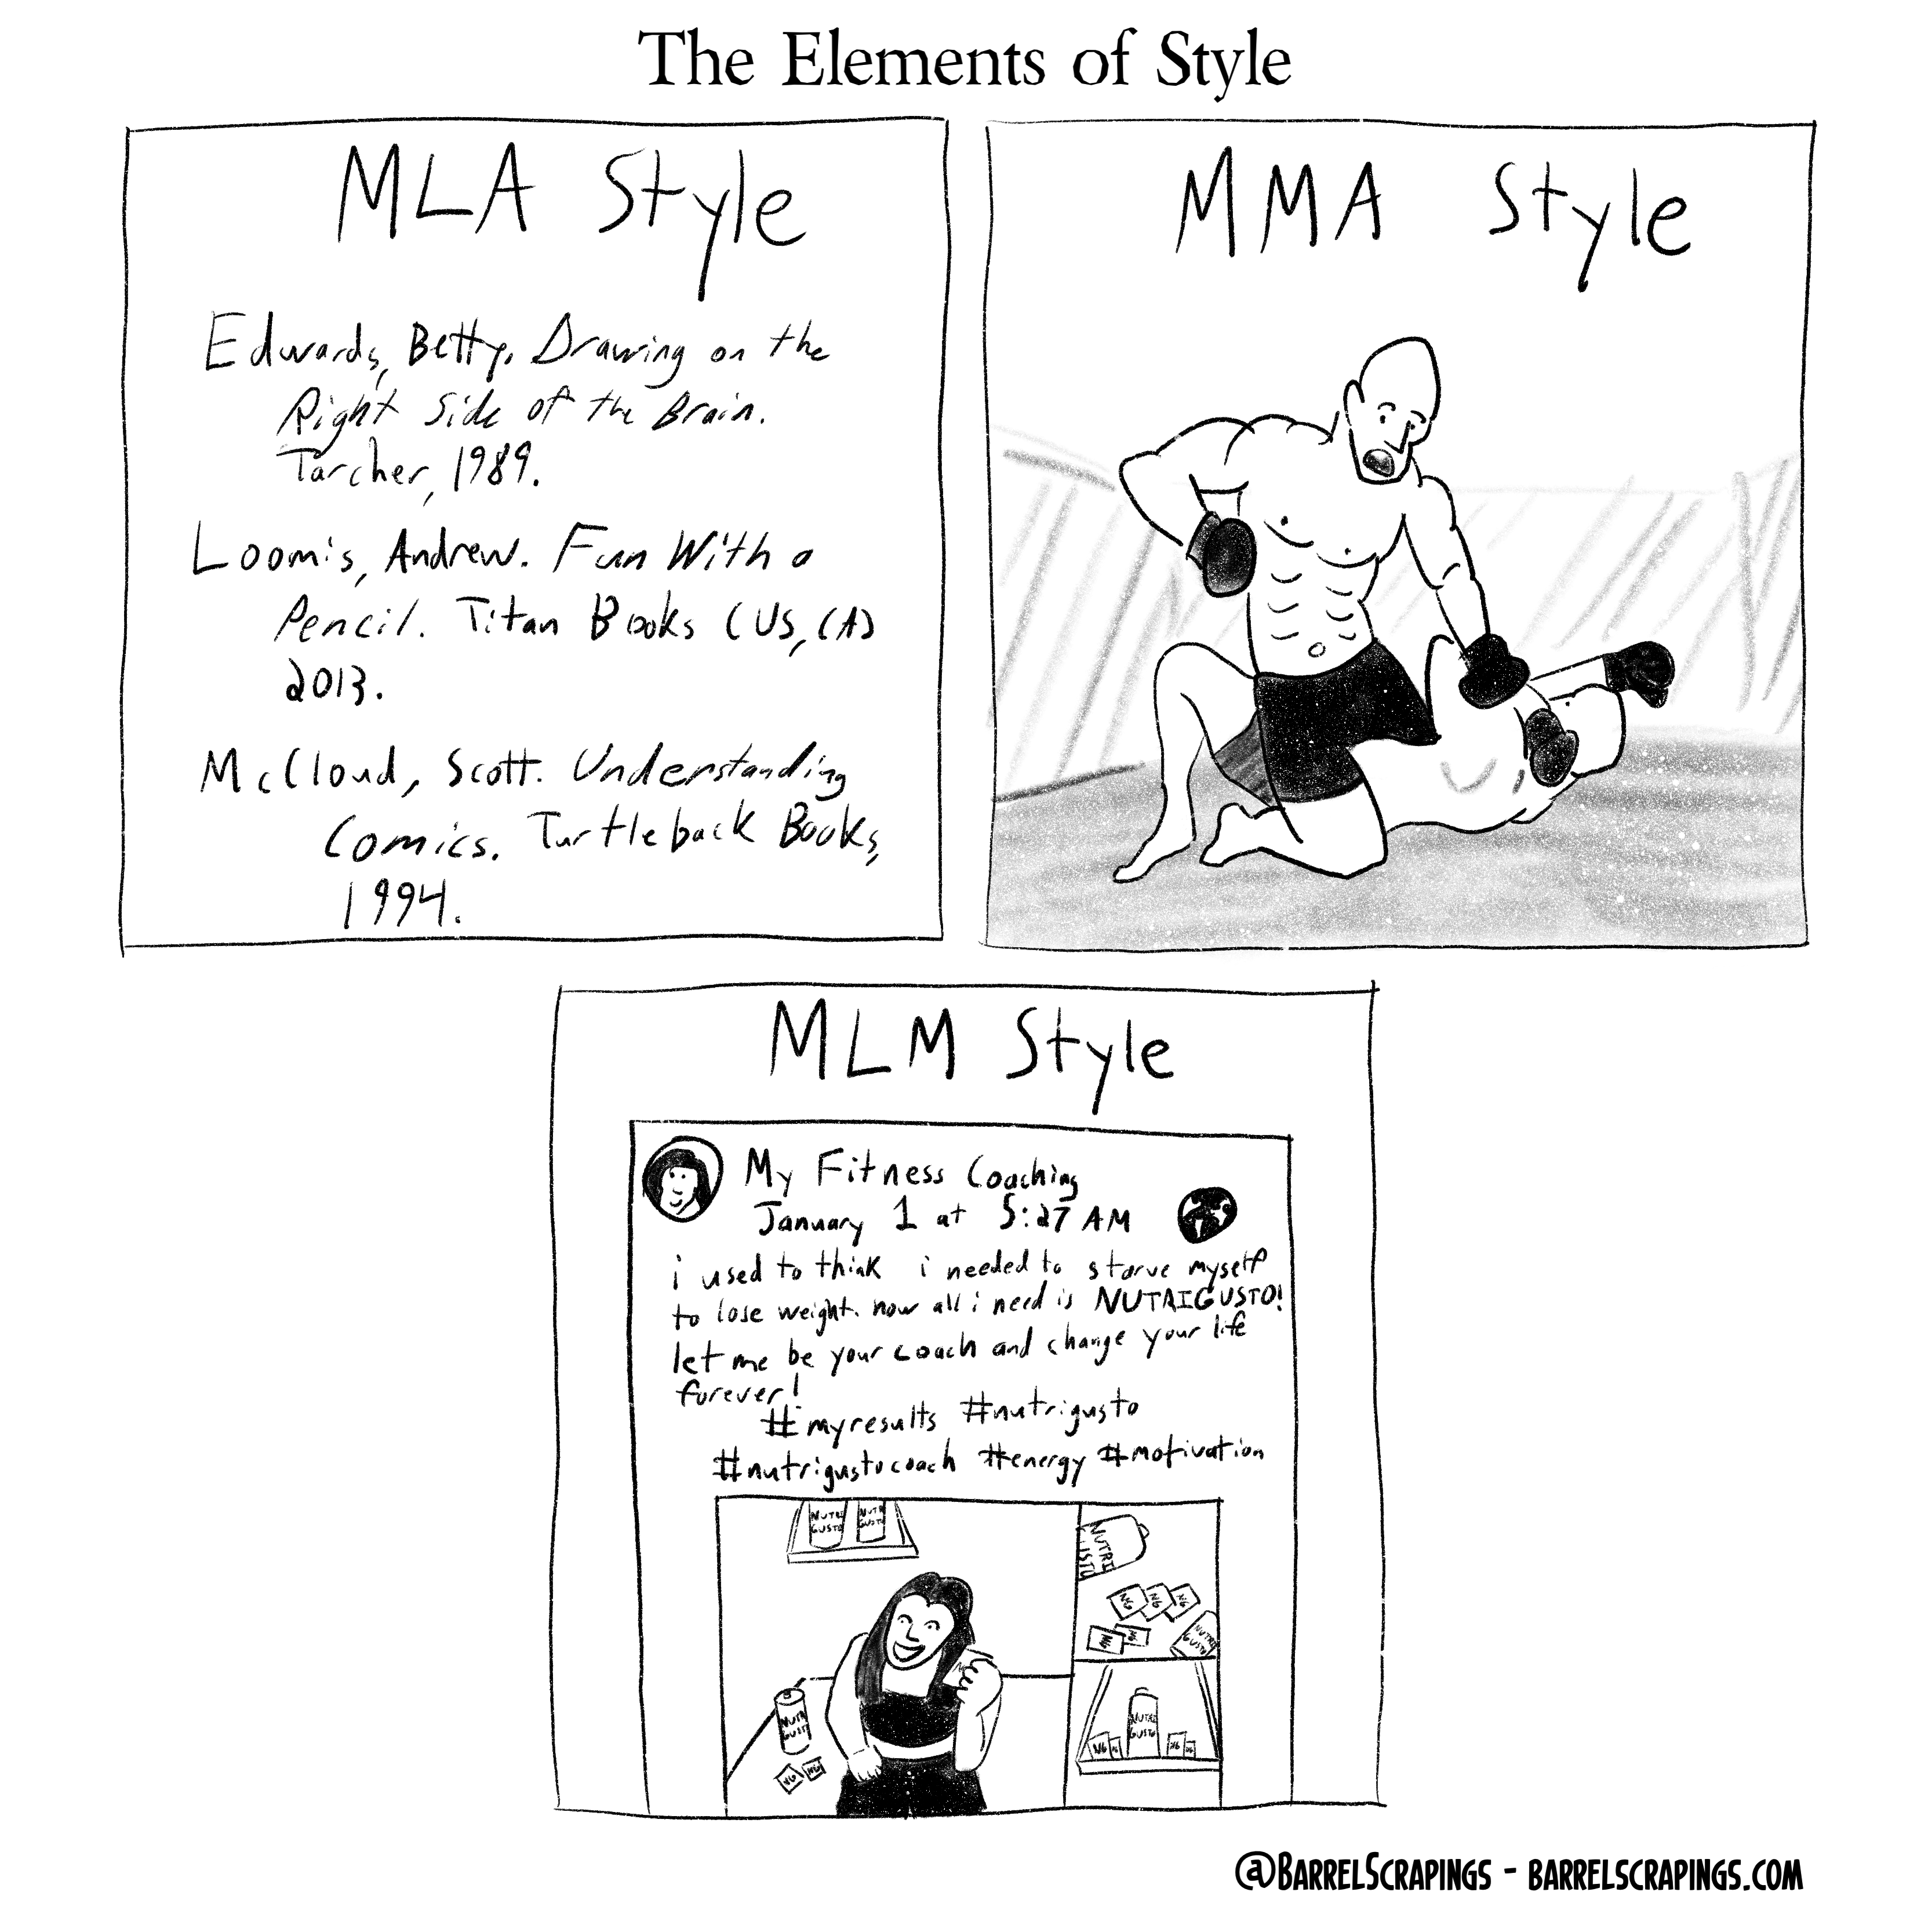 Three images. Image one: A bibliography in MLA style. Image two: Two men fighting, captioned "MMA style". Image three: A woman hocking nutrition supplements on Facebook, with the caption "MLM Style"